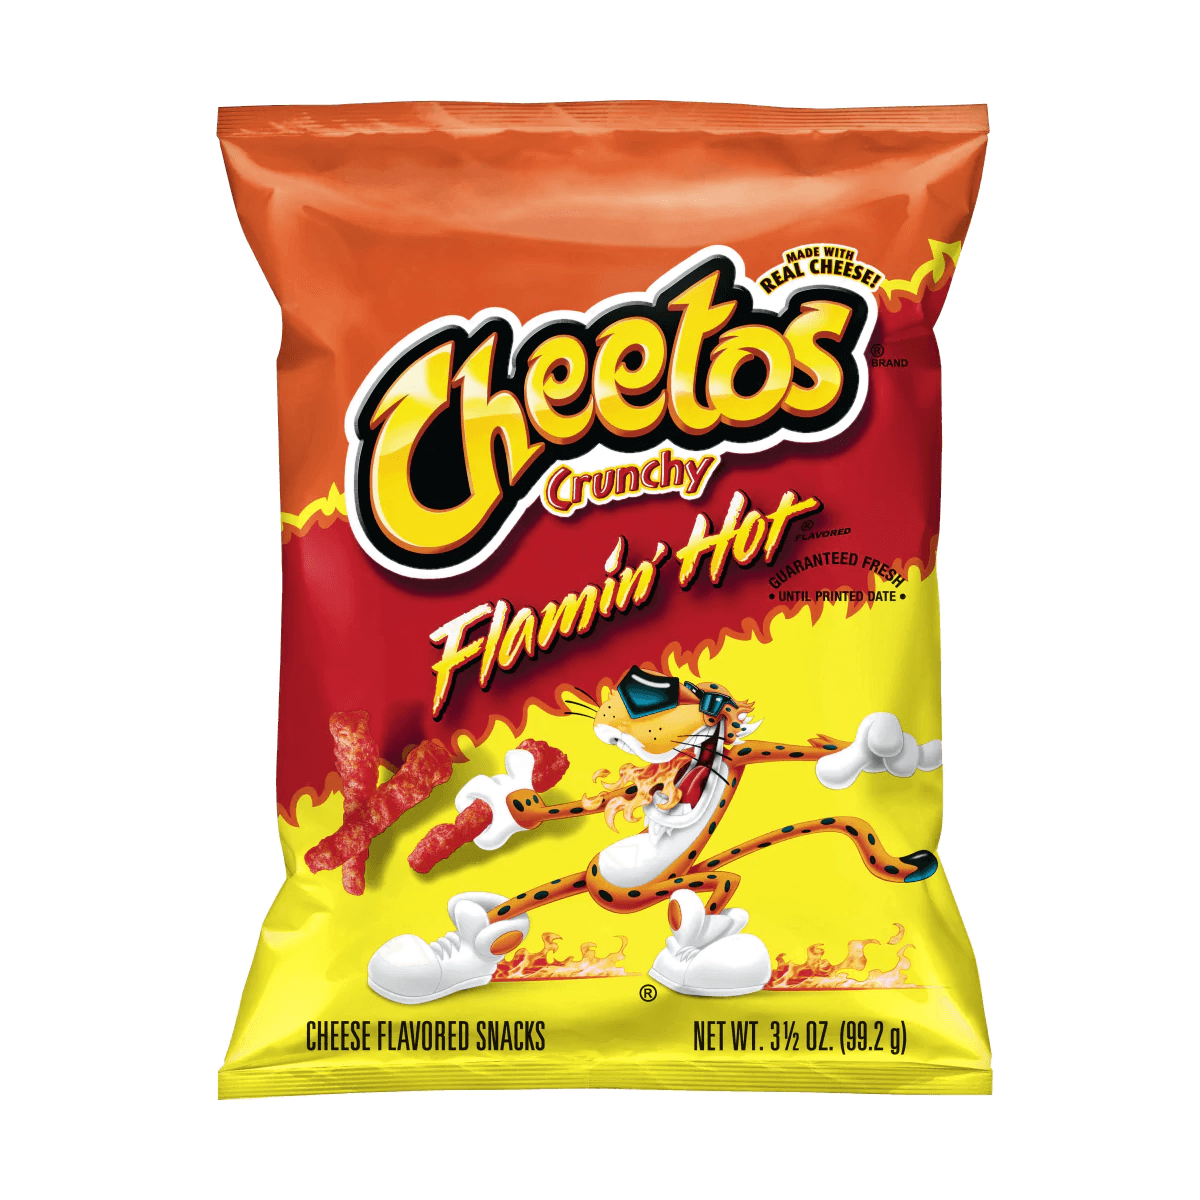 Cheetos Crunchy Pack Free Transparent Image HQ PNG Image